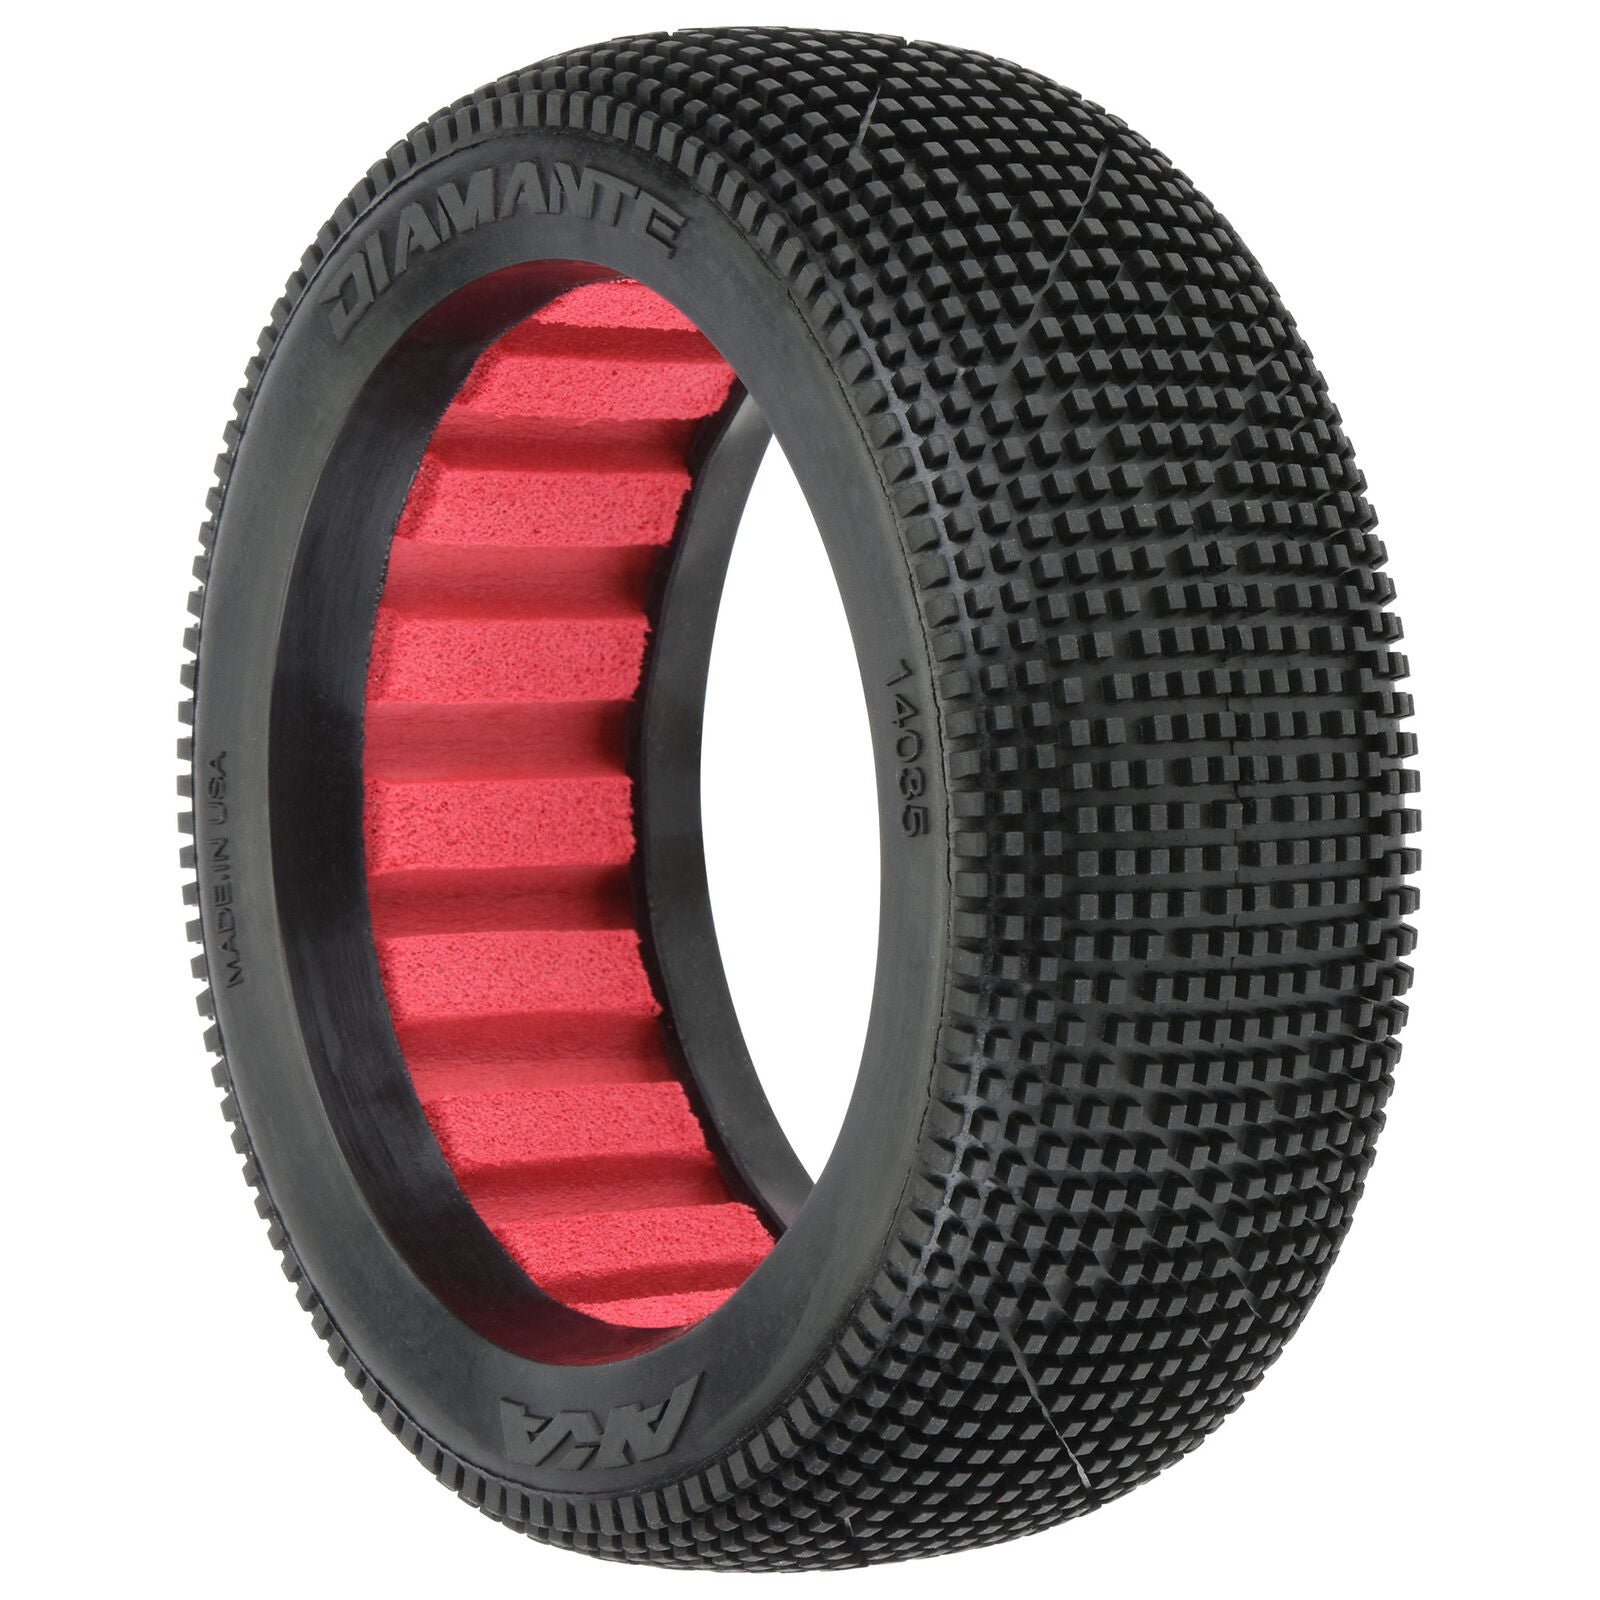 1/8 Diamante Ultra Soft Front/Rear Off-Road Buggy Tires (2)